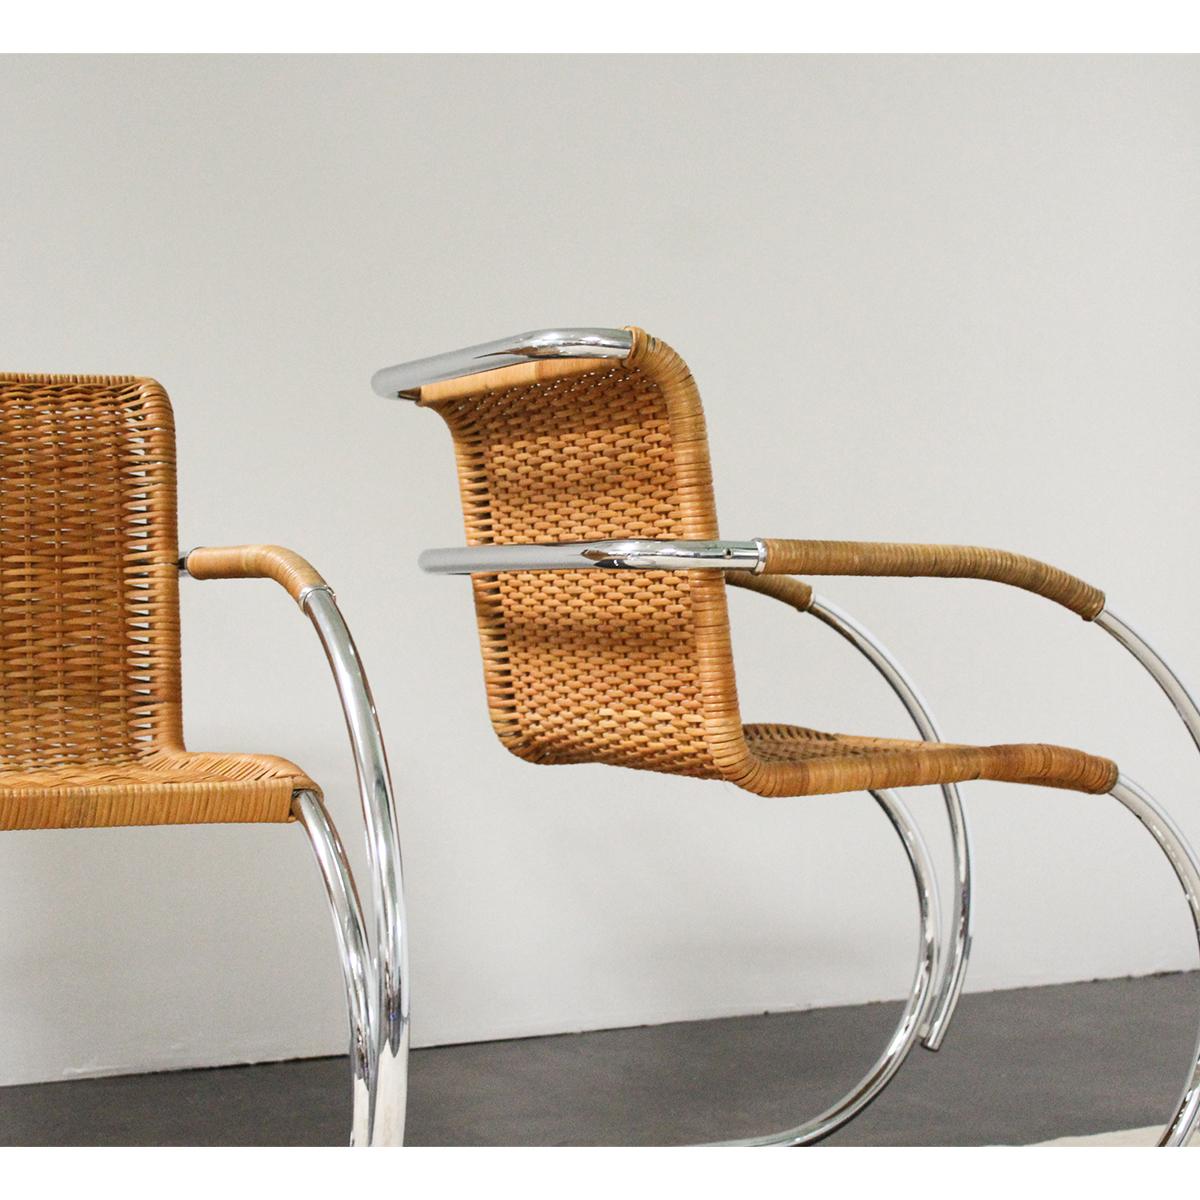 A pair of vintage 'MR20' cantilevered cane armchairs by Mies van der Rohe for Knoll International. This chair is a version of the chair Mies presented in 1927 at the Stuttgart Weissenhof Estate — a seminal Werkbund exhibition in Germany. The MR20